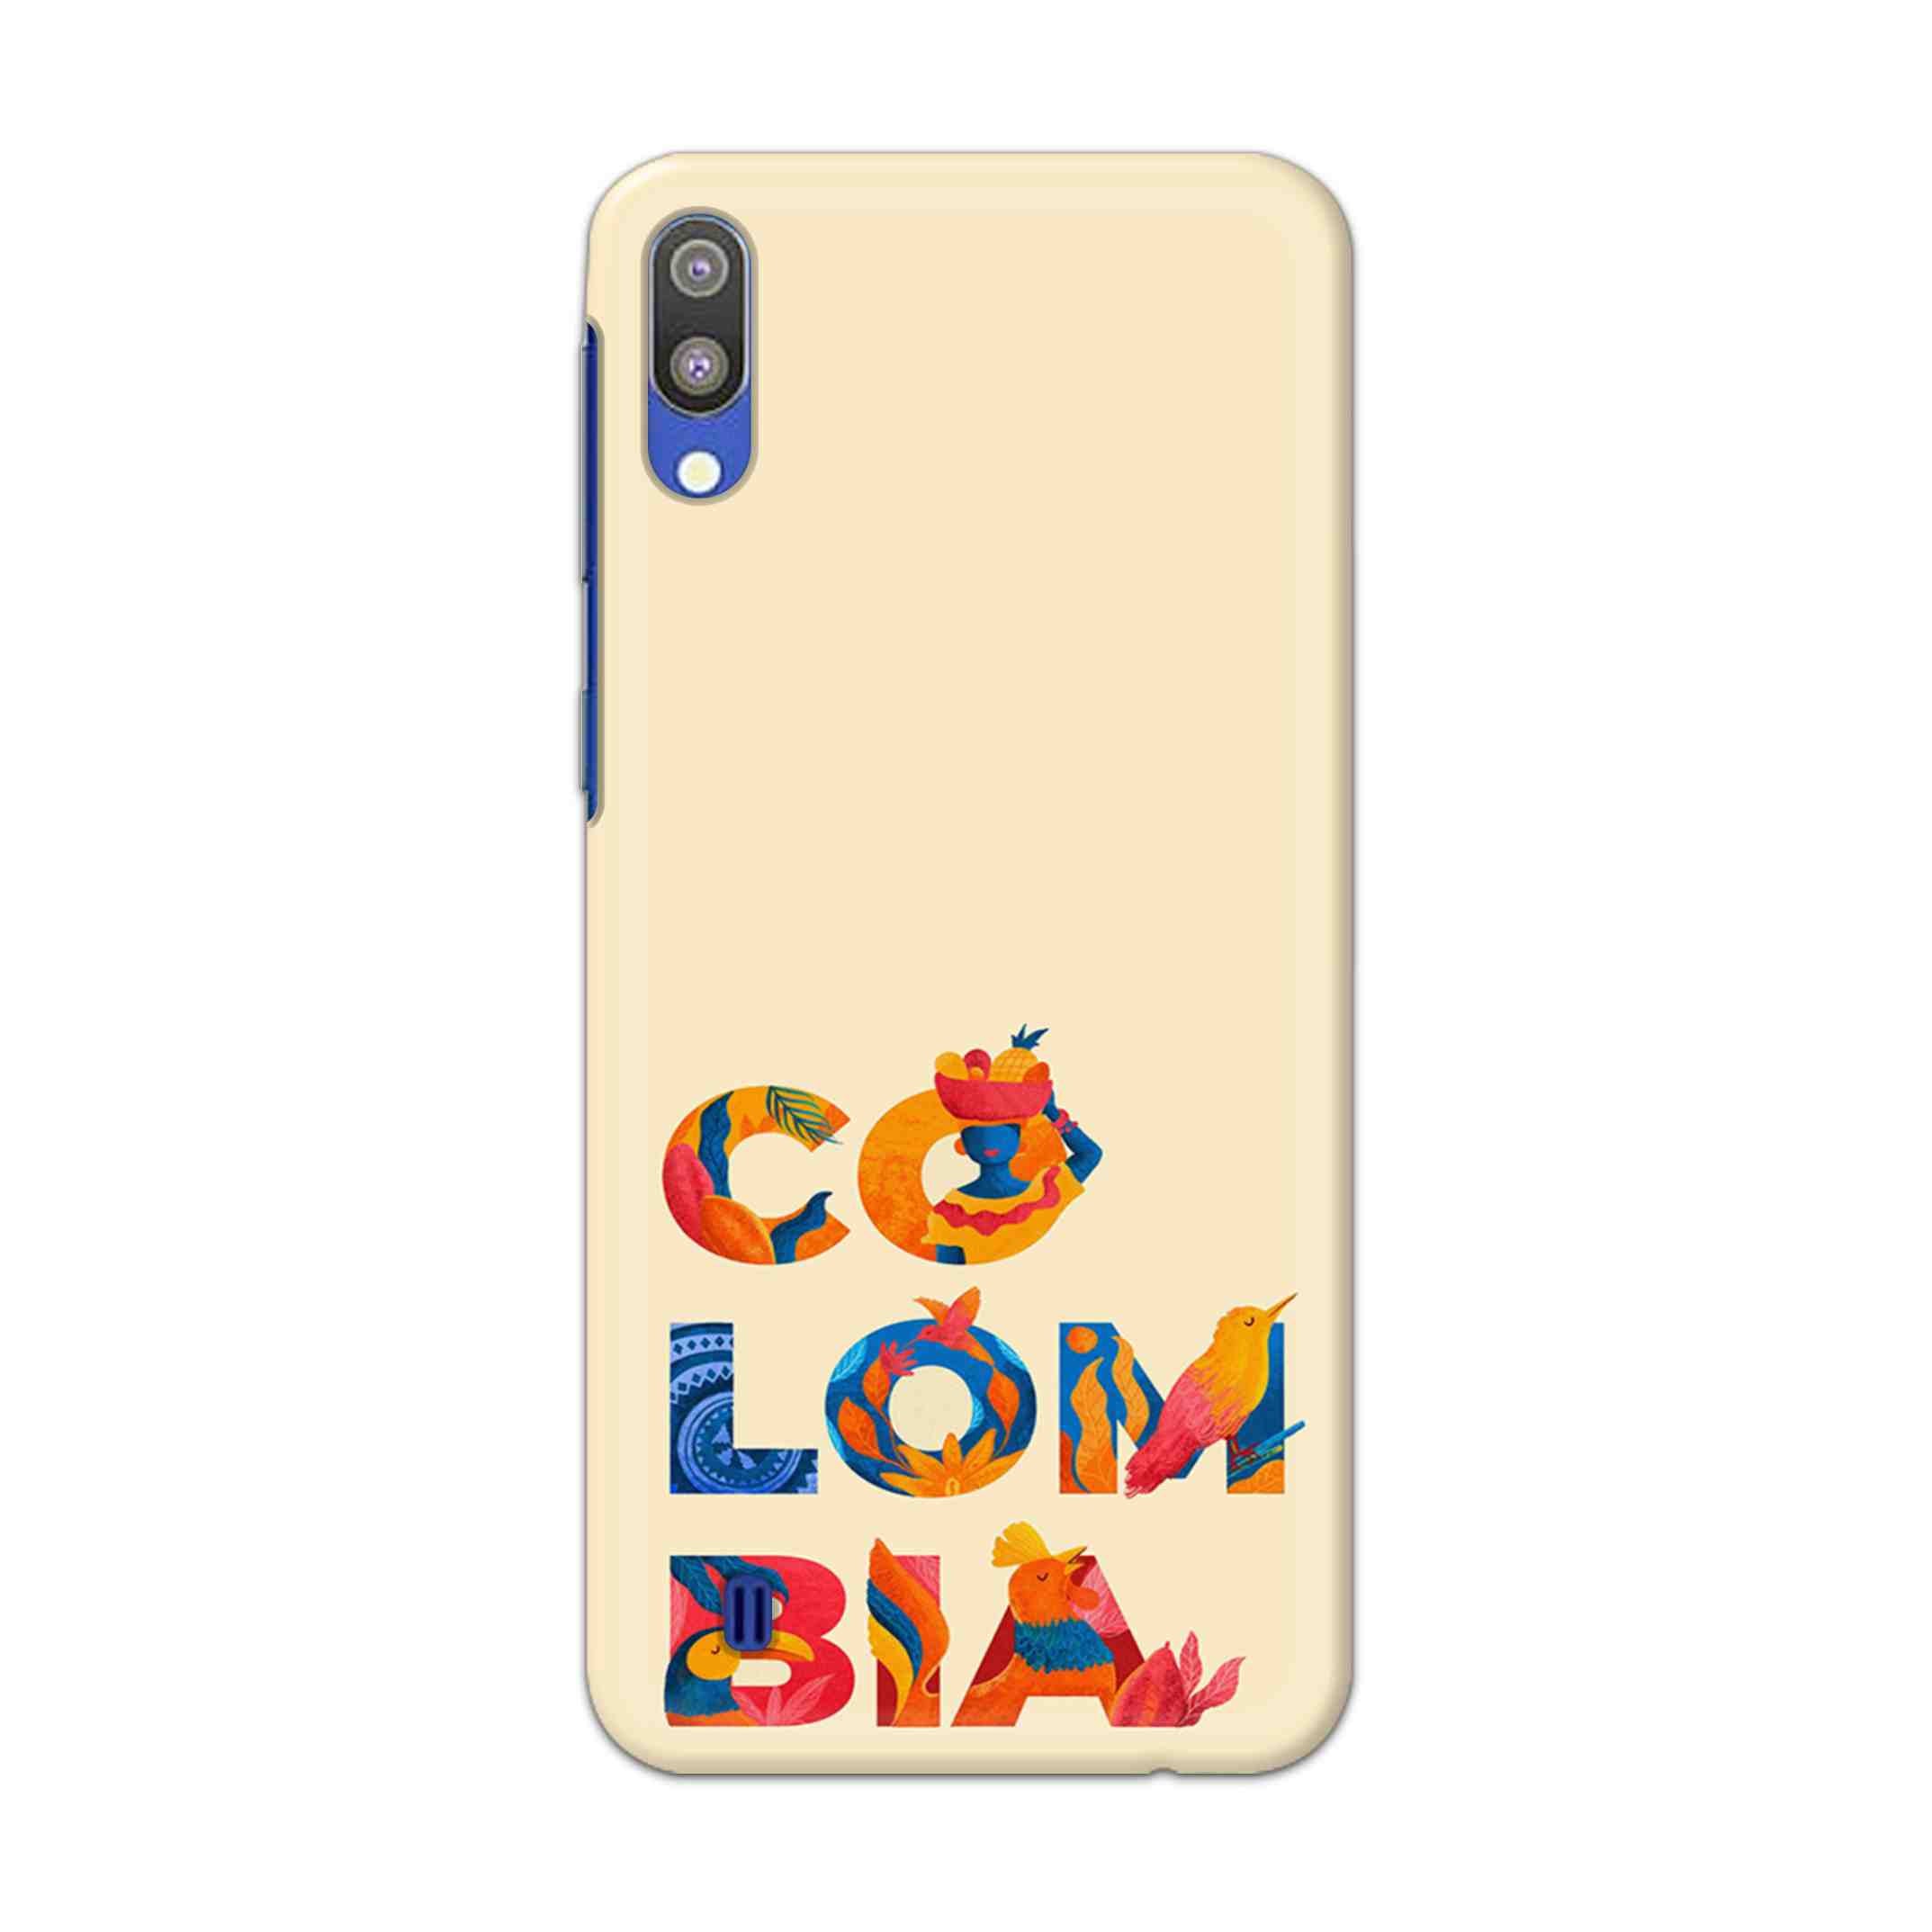 Buy Colombia Hard Back Mobile Phone Case Cover For Samsung Galaxy M10 Online